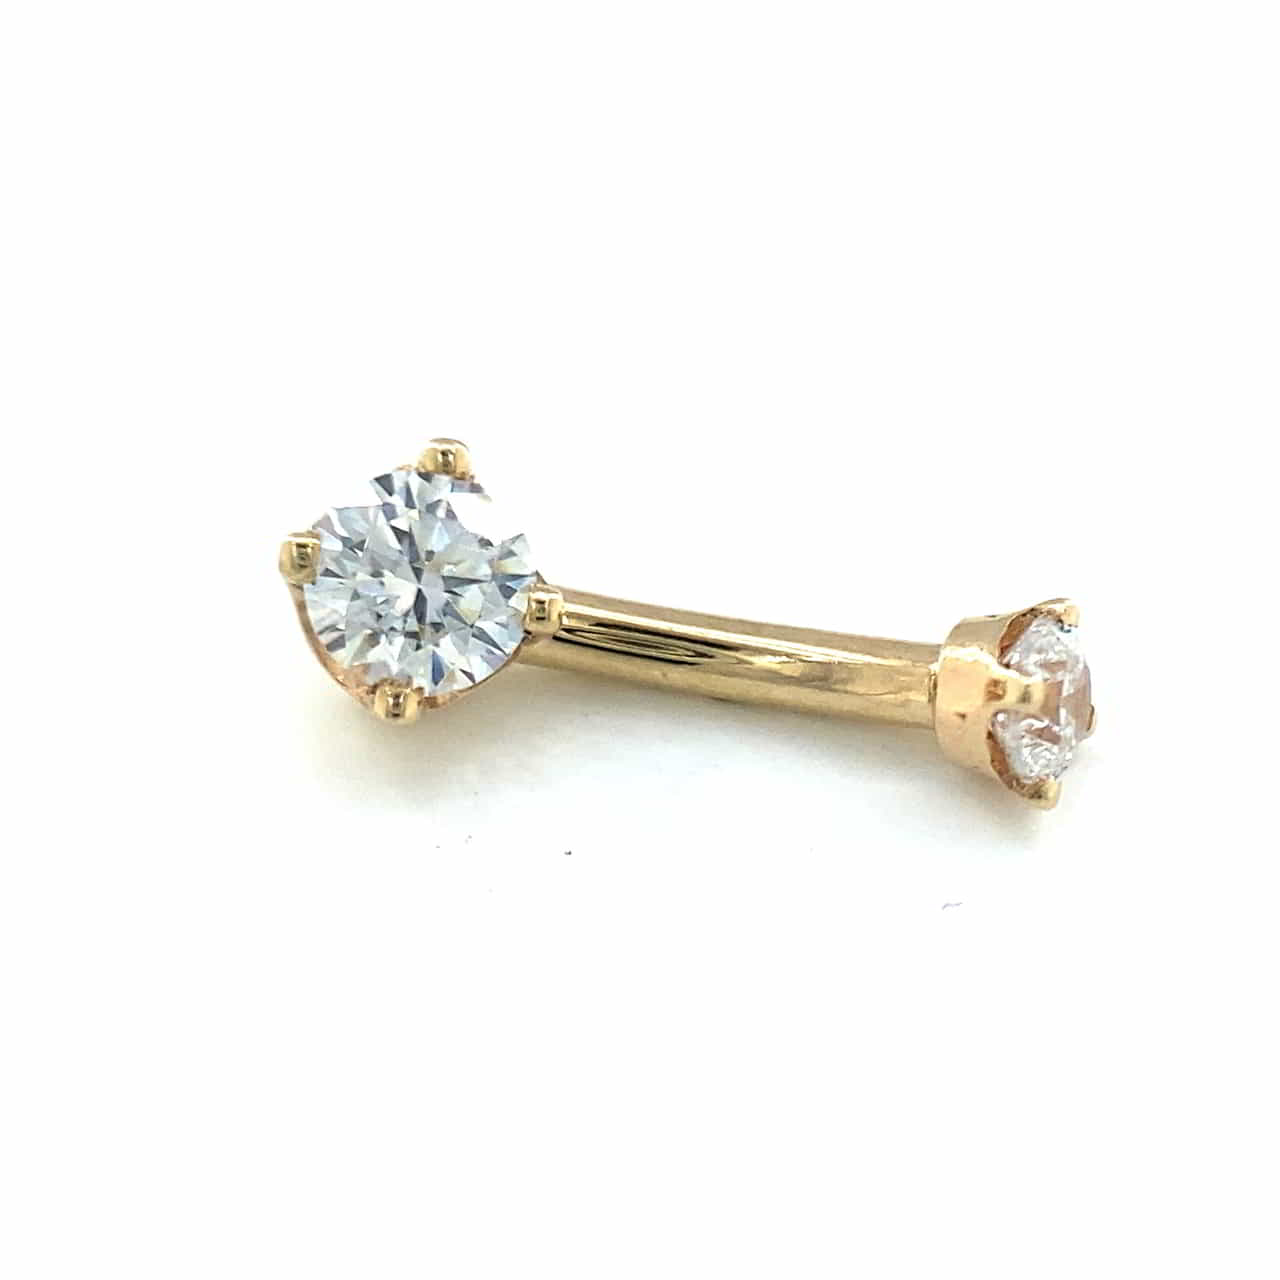 BVLA Curved Barbell with Threaded 3mm Round Prong Top and Fixed 4mm Prong Bottom Navel